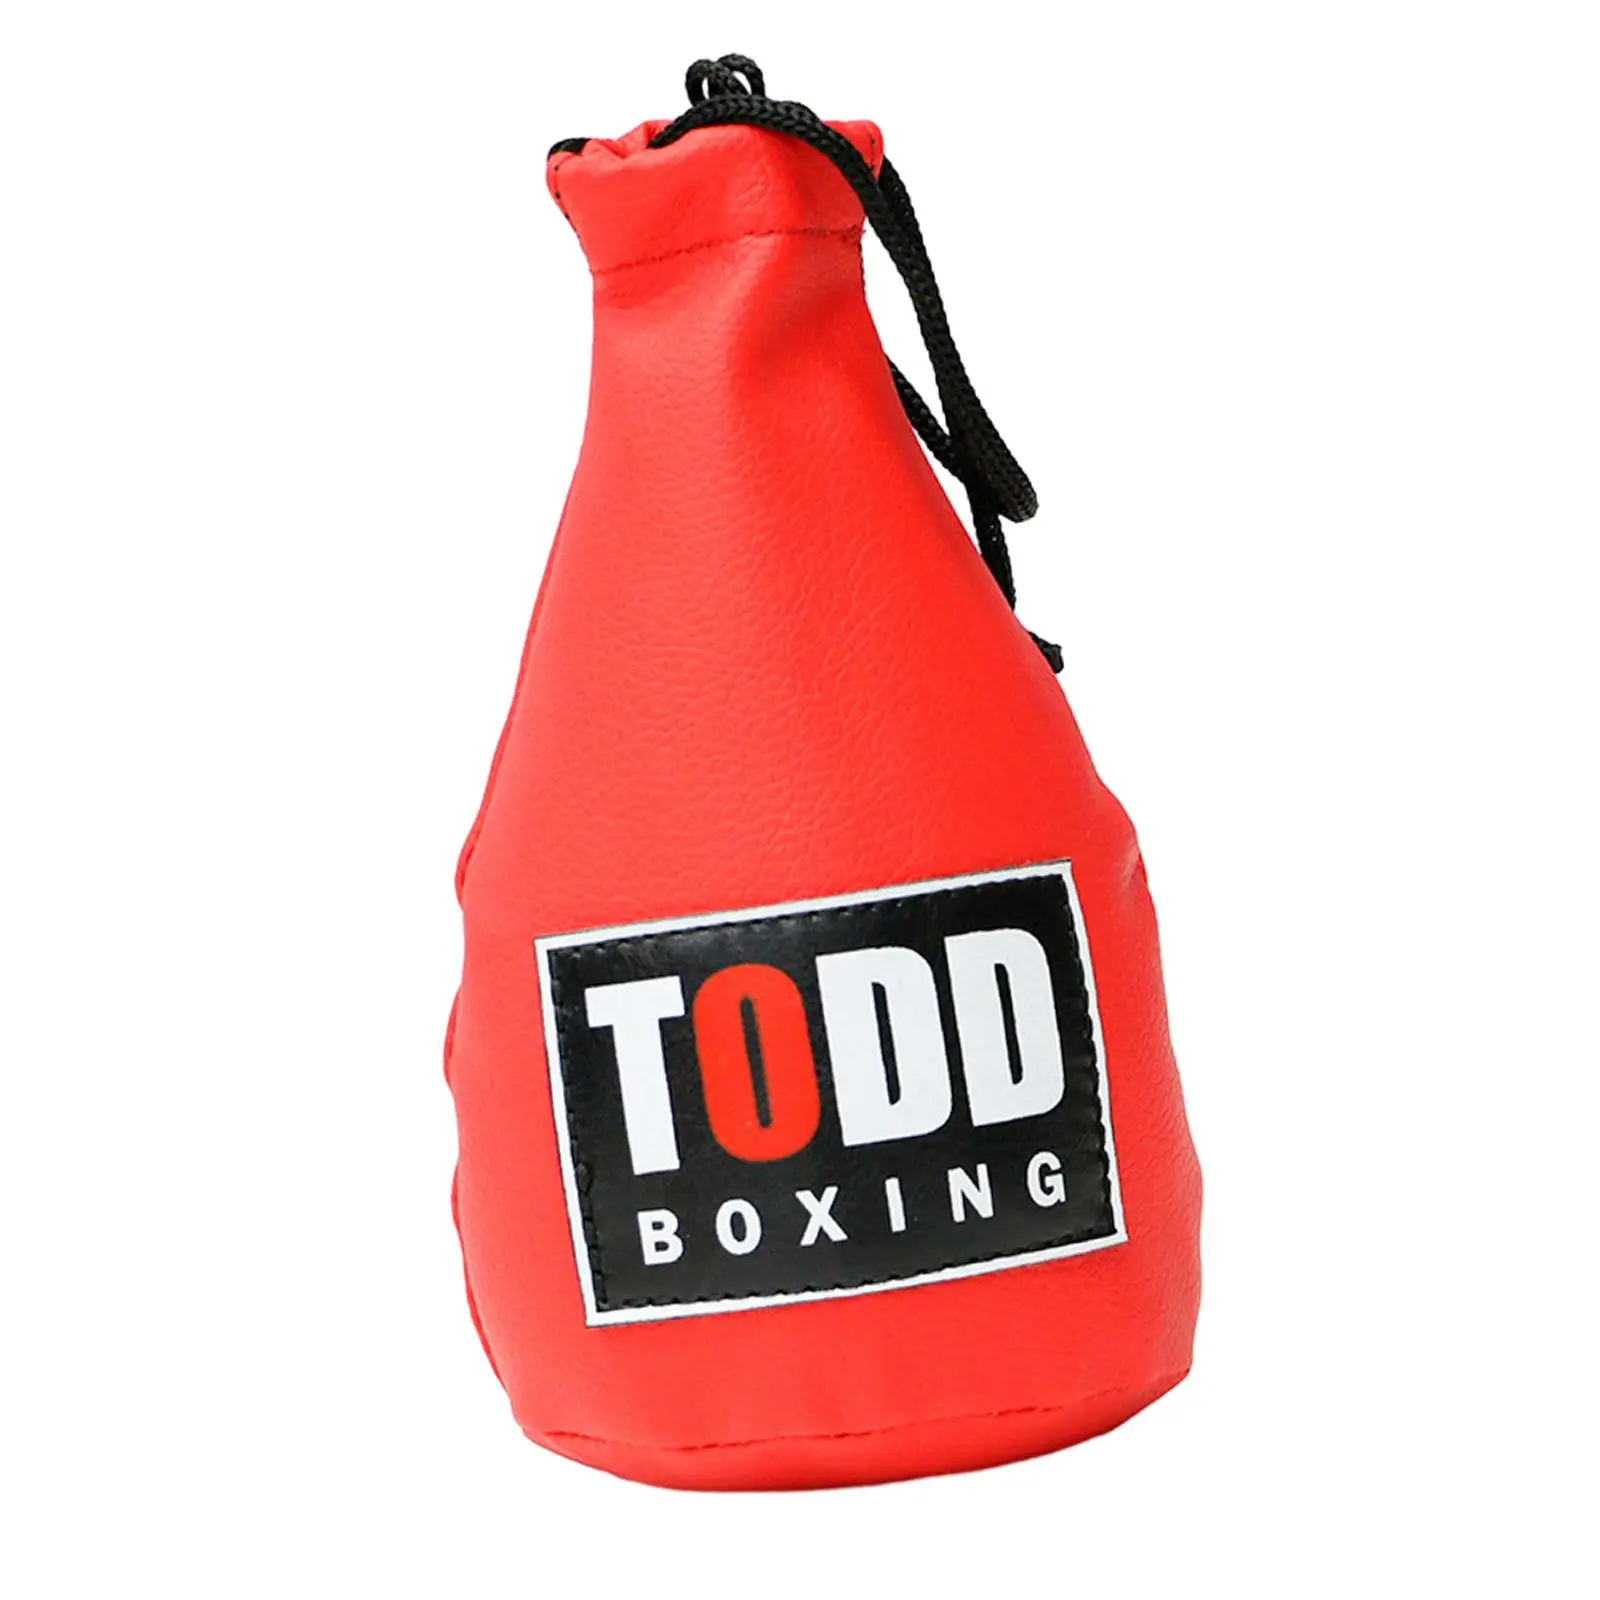 Boxing Punch Bag Gear for Punching Speed Skill Hand Eye Coordination